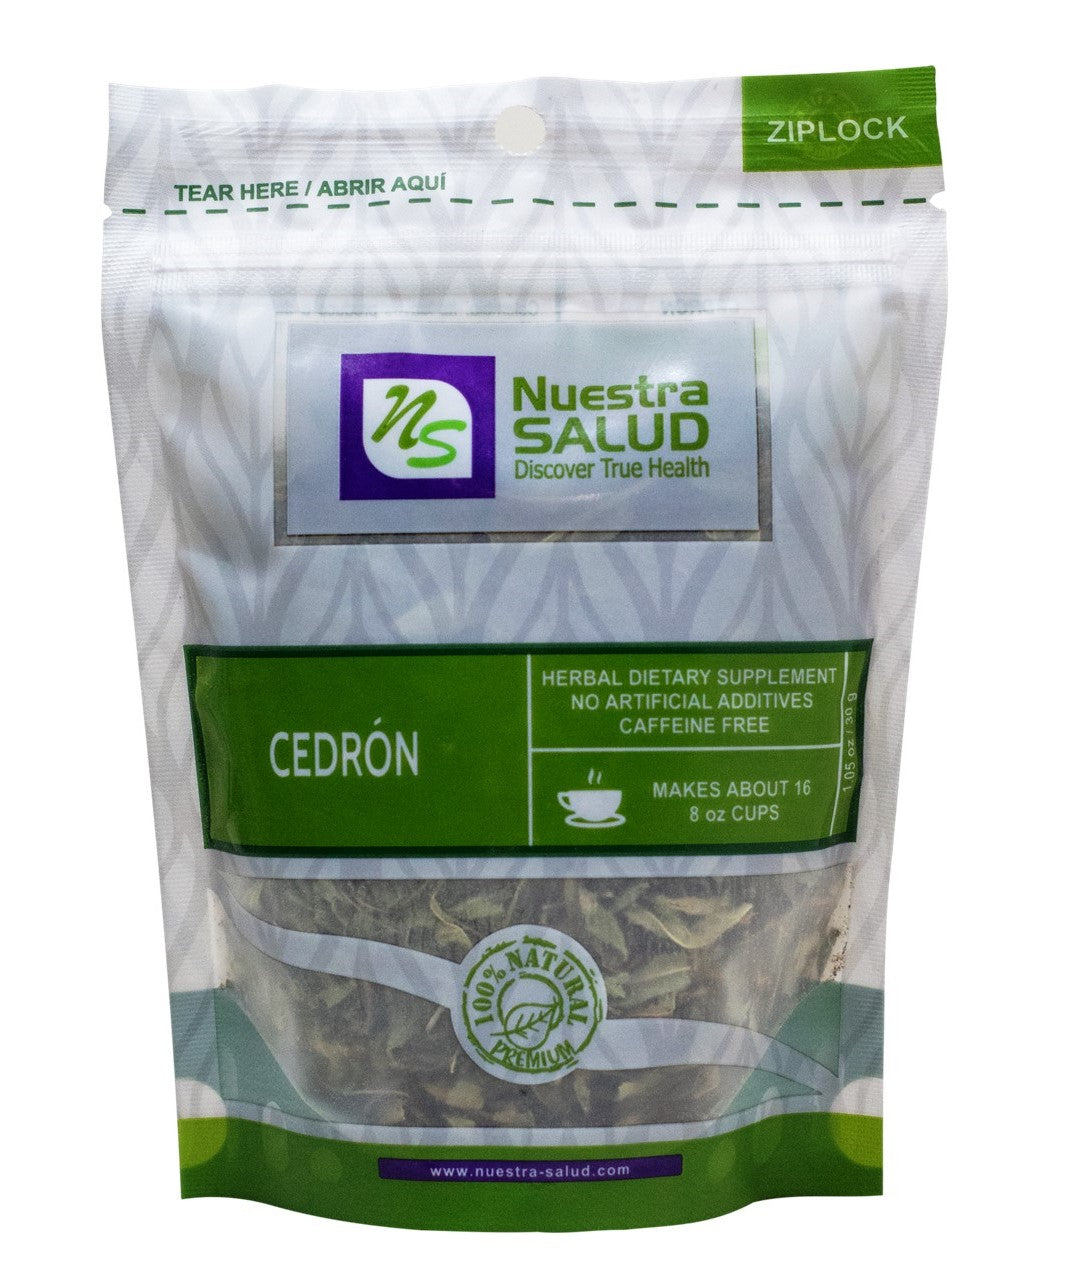  Cedron Loose Herbal Infusion Tea Value Pack (90g) by Nuestra Salud sold by NS Herbs Co.